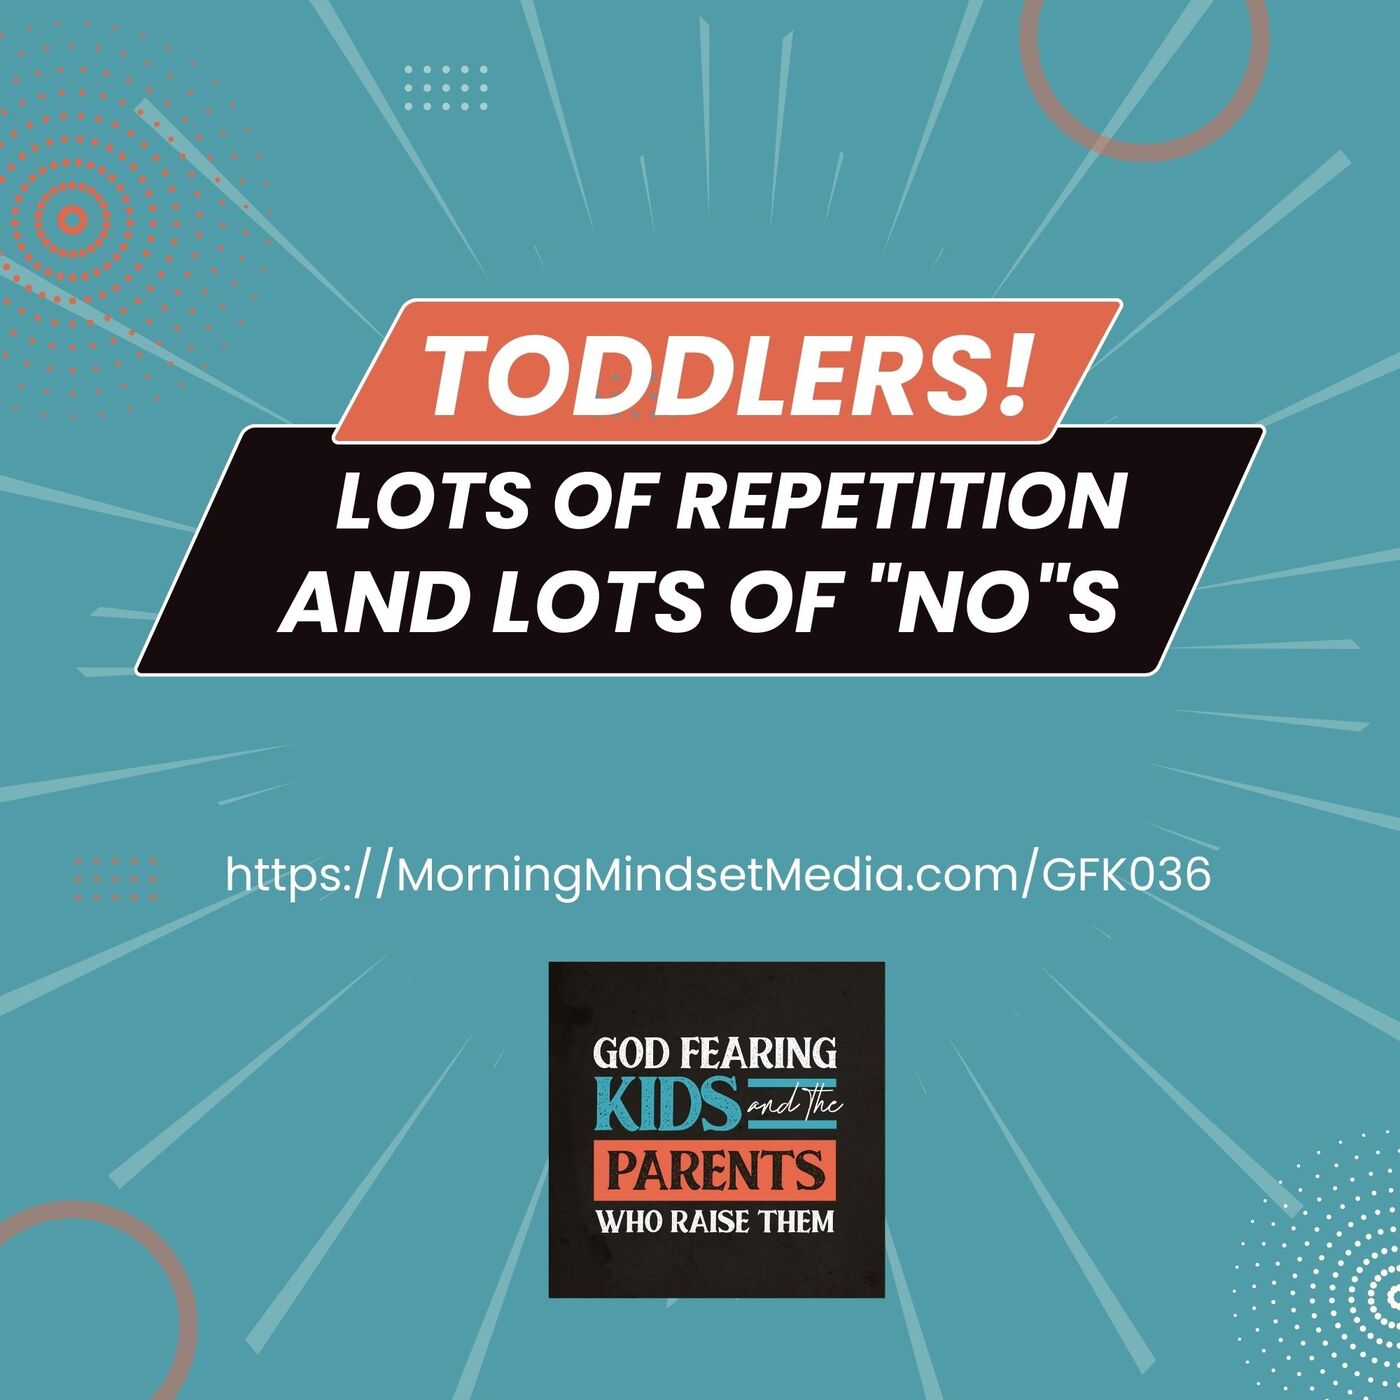 036: TODDLERS: Lots of Repetition and lots of “No”s